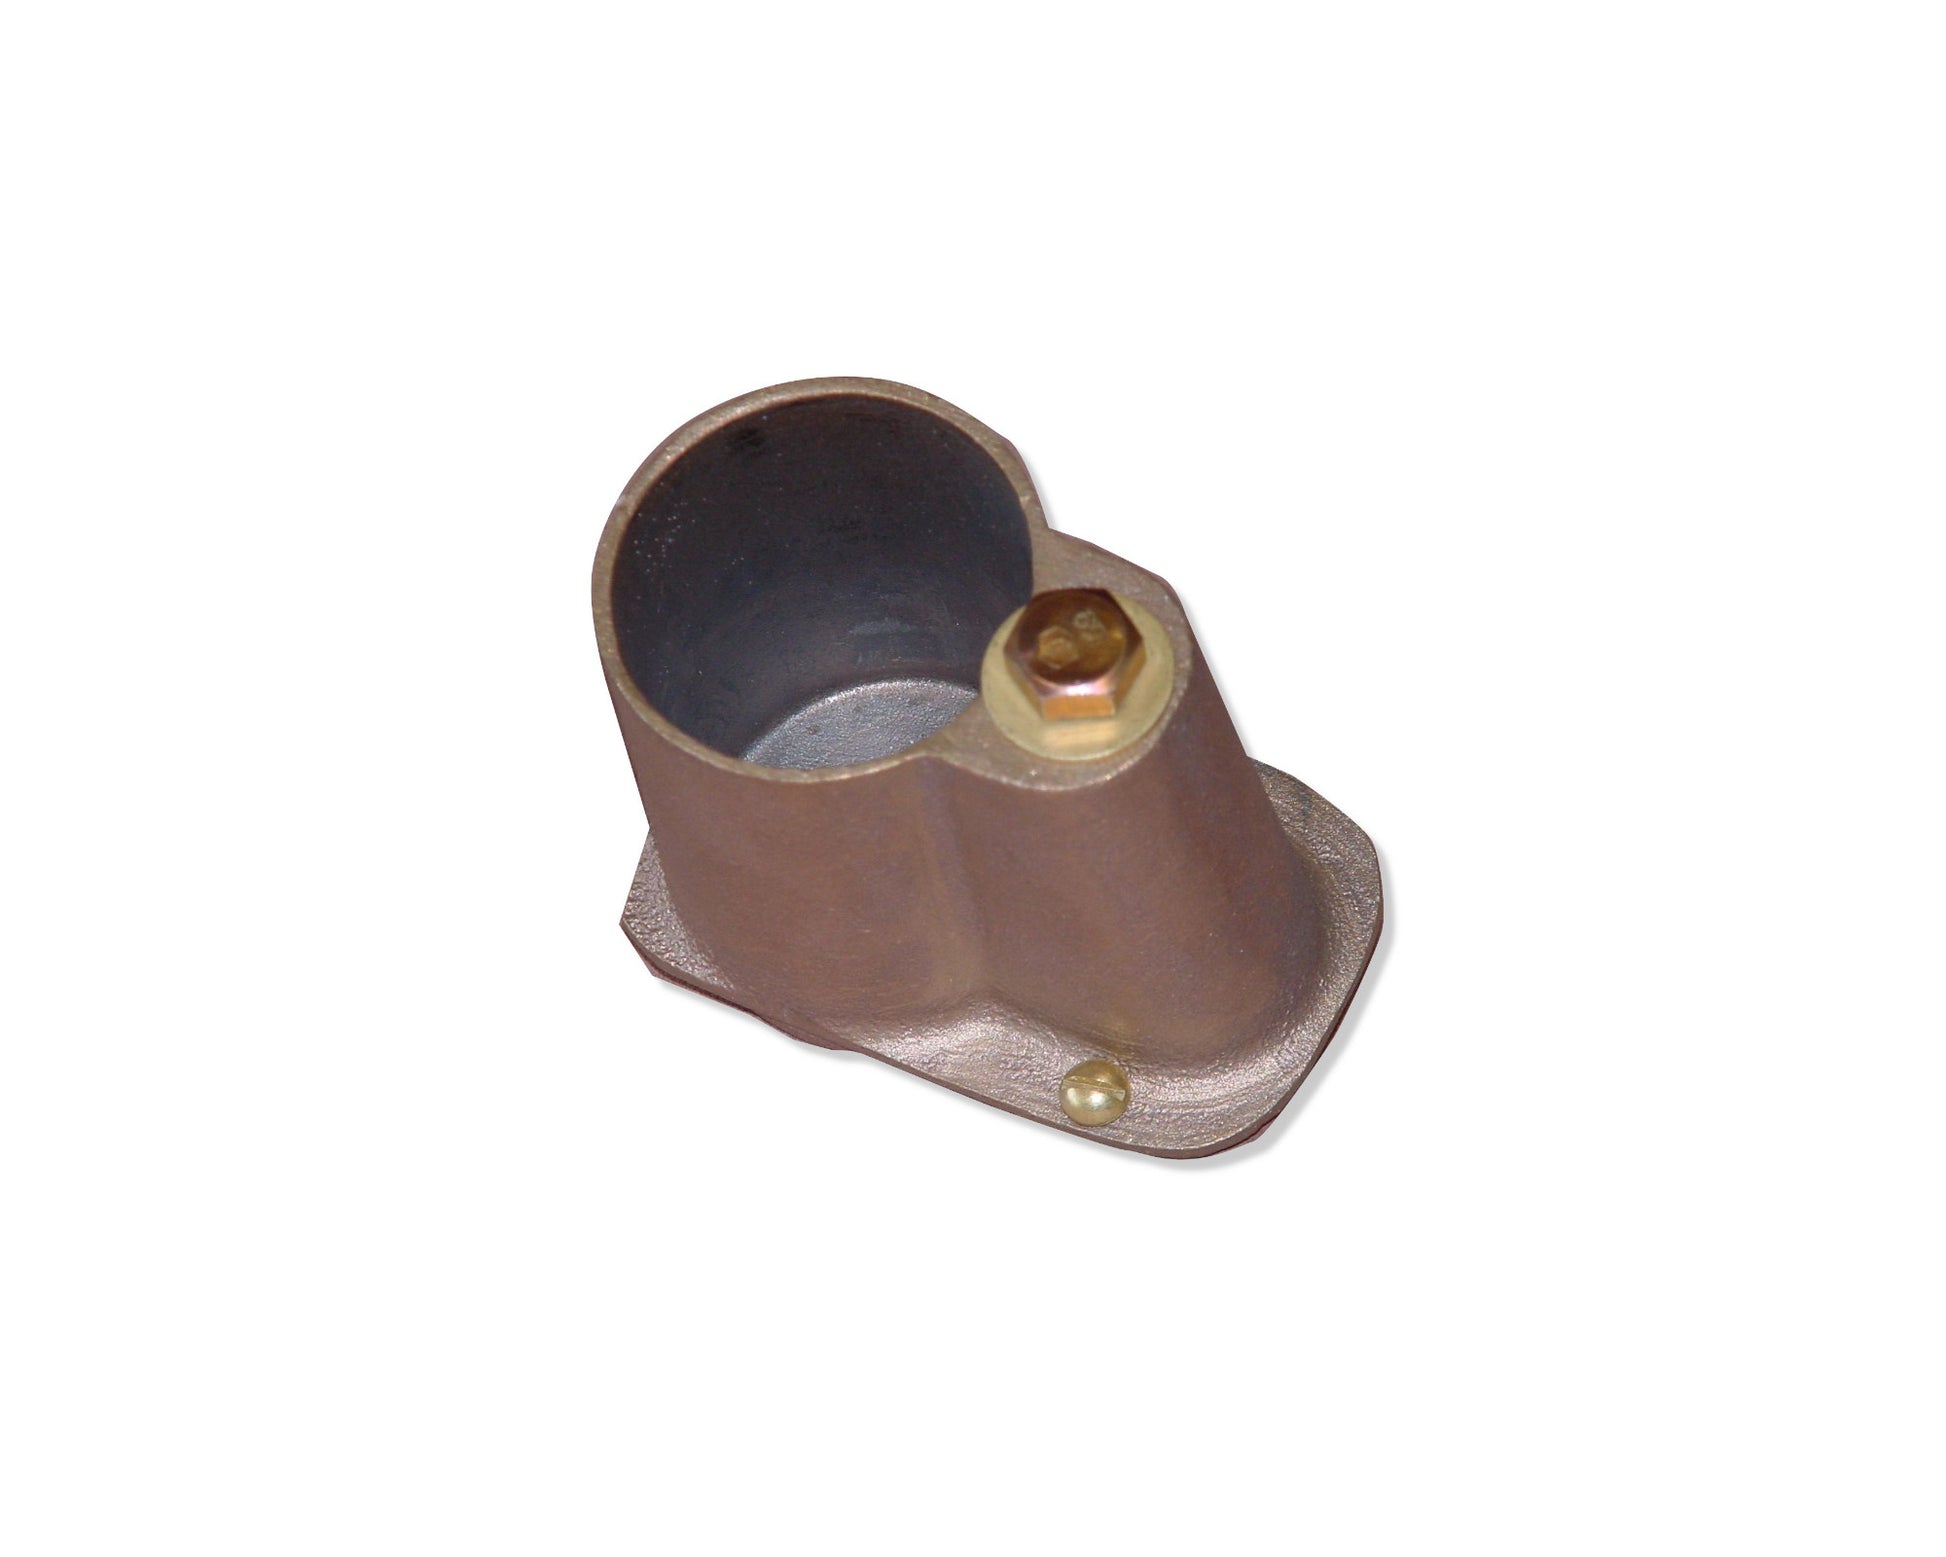 Afras Brass Wedge Anchor With Integral Flange for 1.900 Tubing 